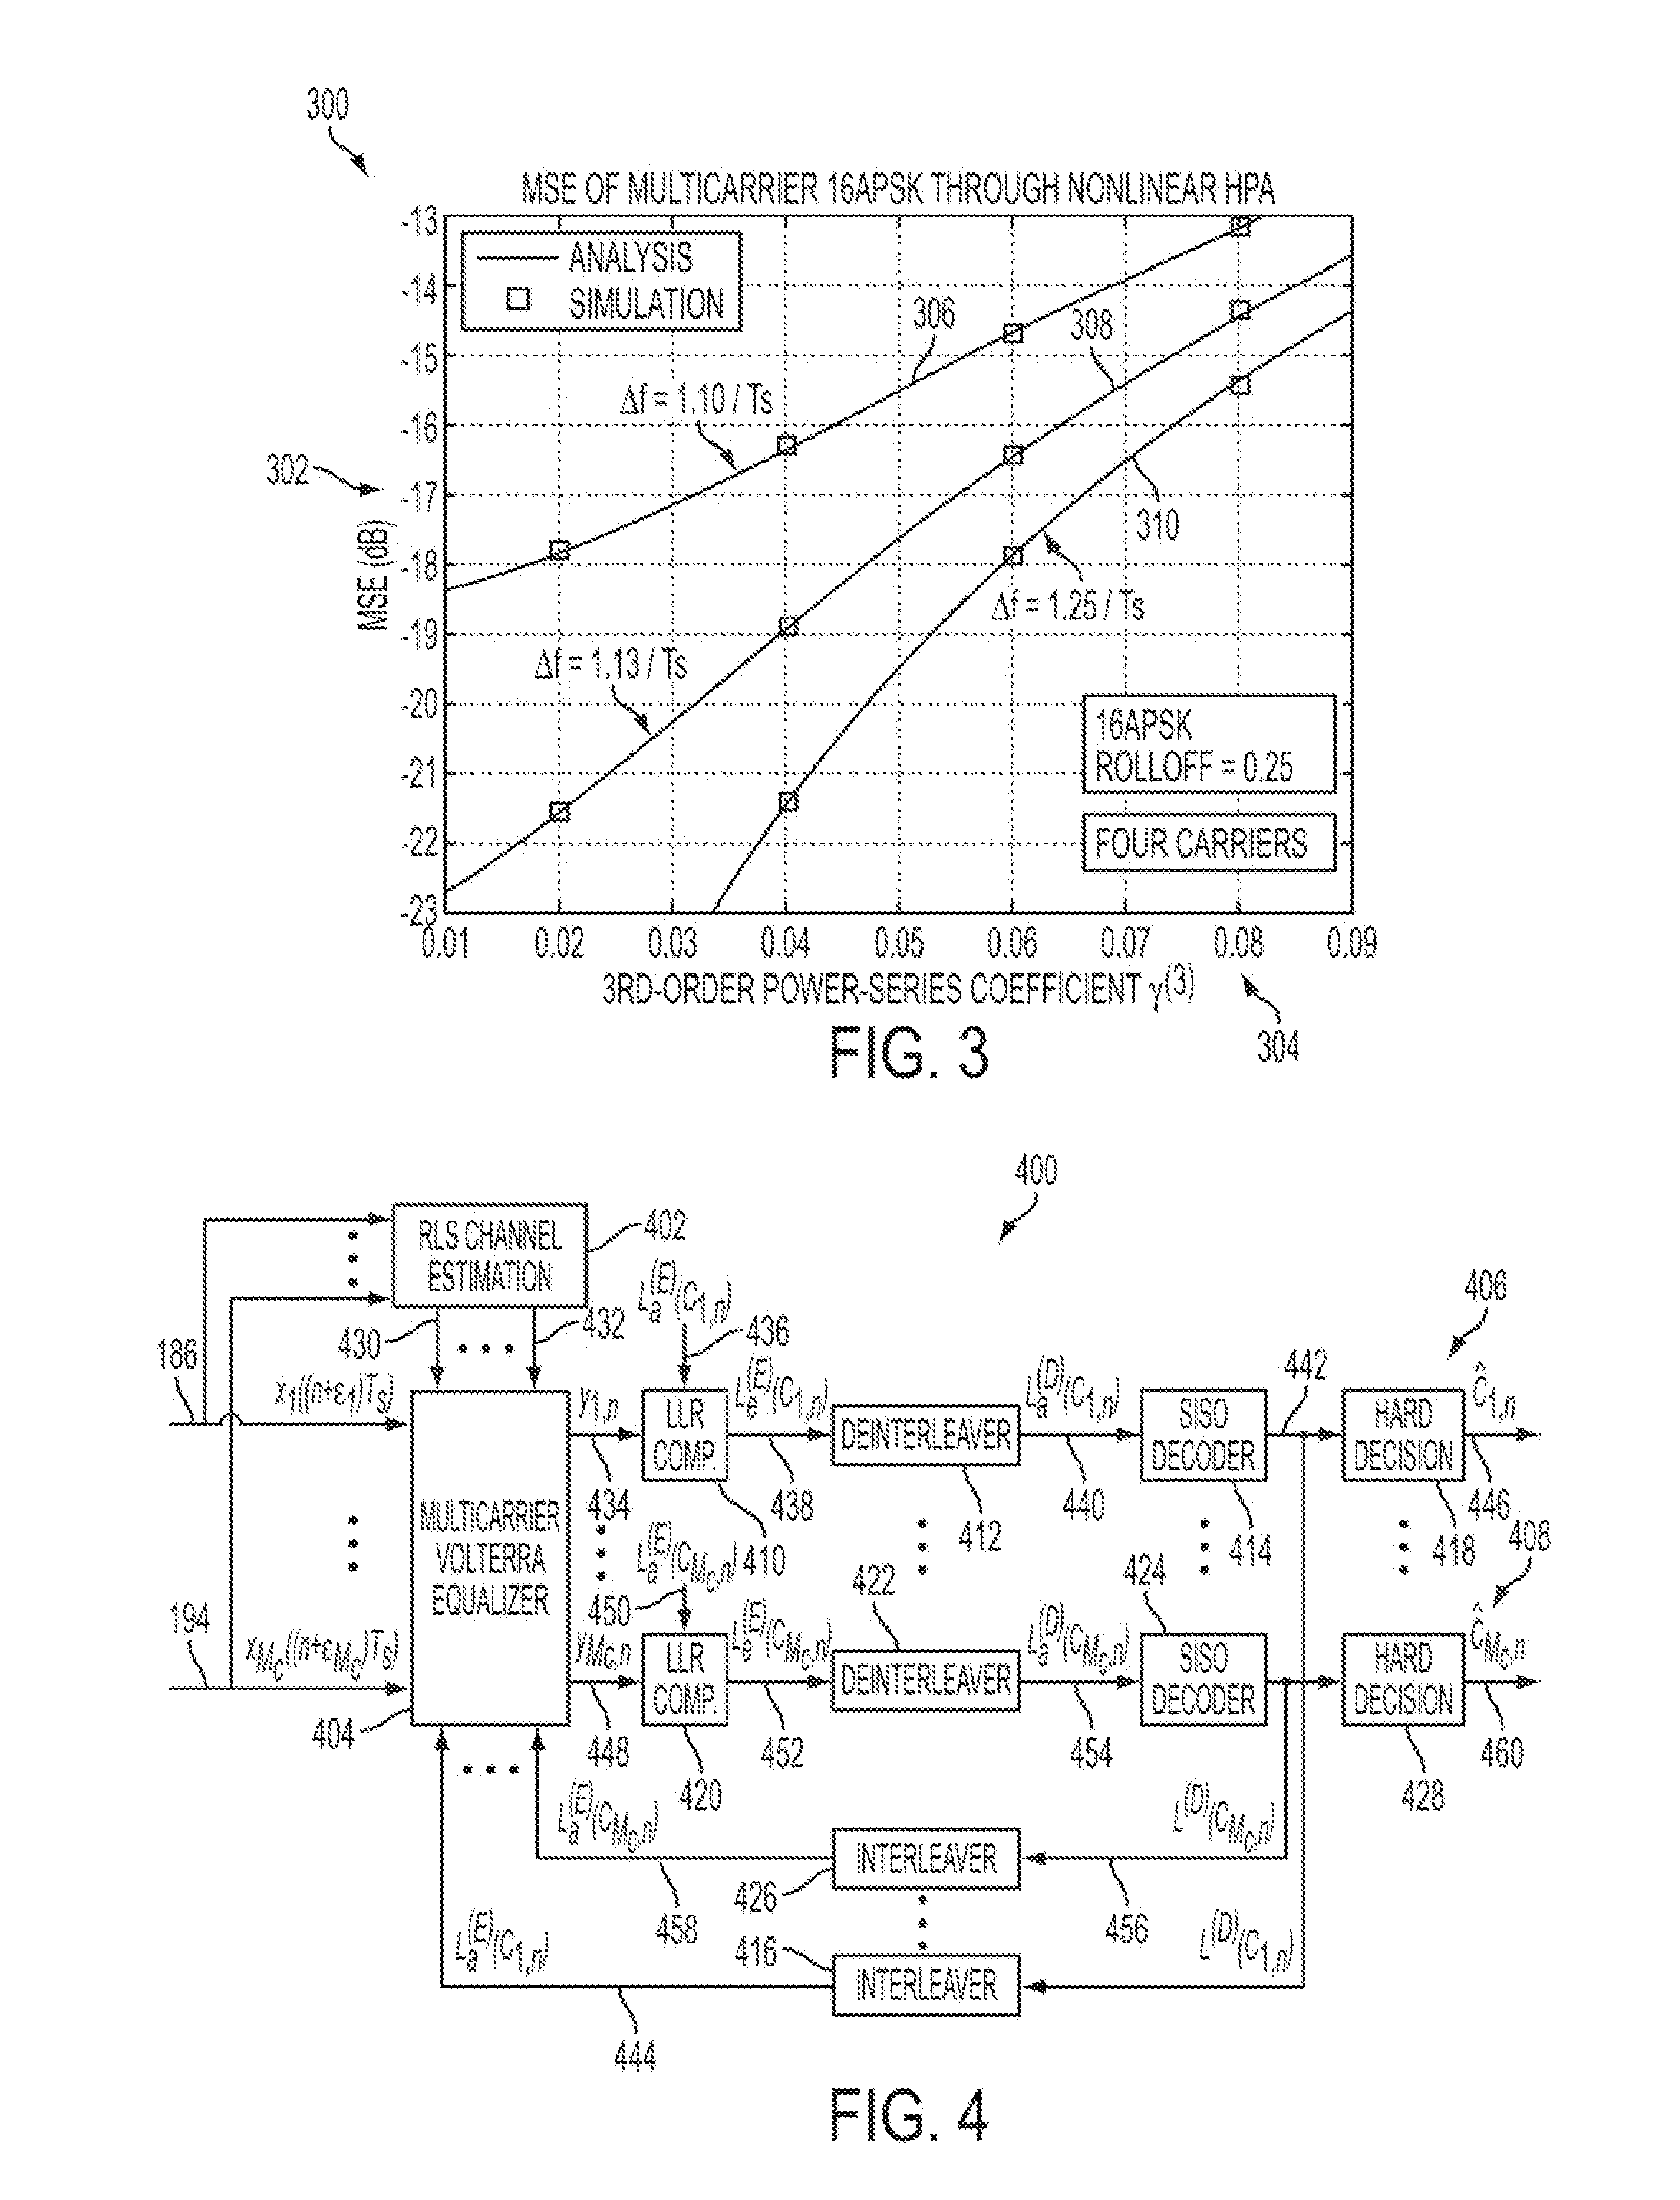 System and method for iterative nonlinear compensation for intermodulation distortion in multicarrier communication systems